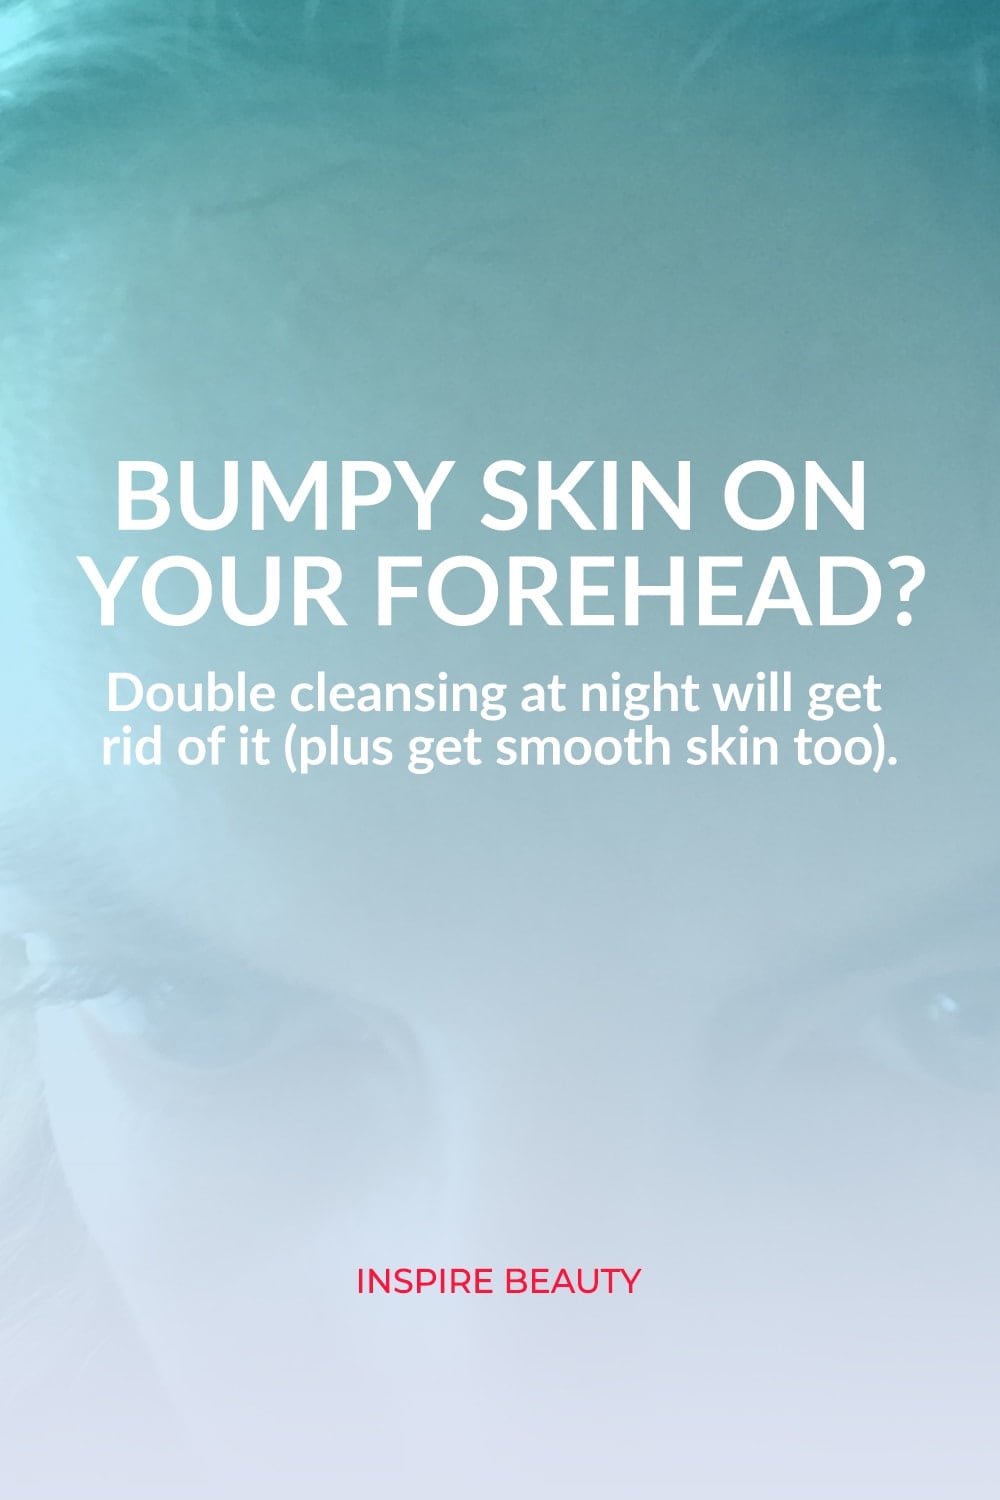 How to get rid of bumpy forehead texture with double cleansing.